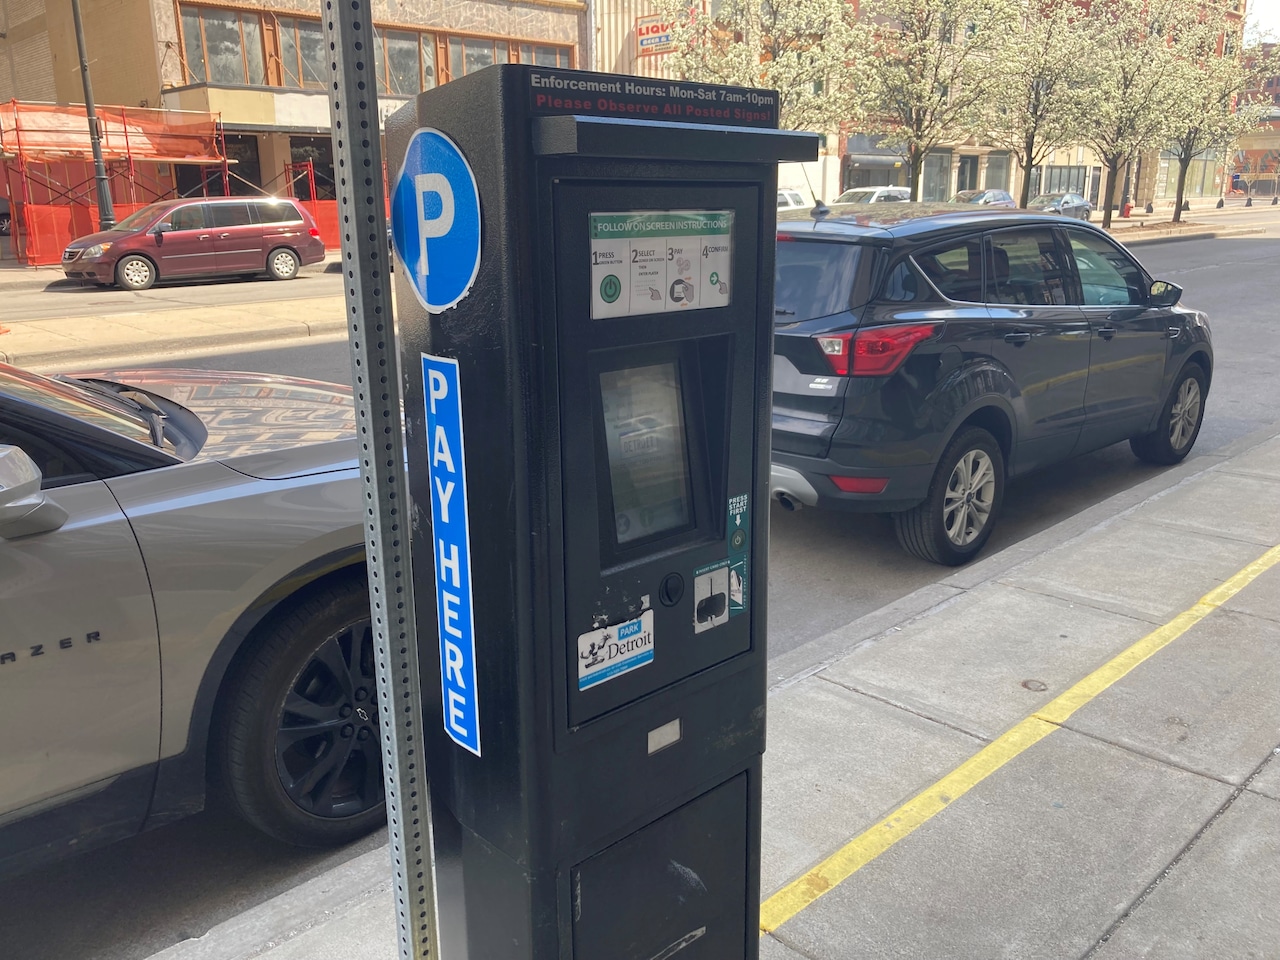 Cleveland to use automated license plate readers to enforce parking fees [Video]